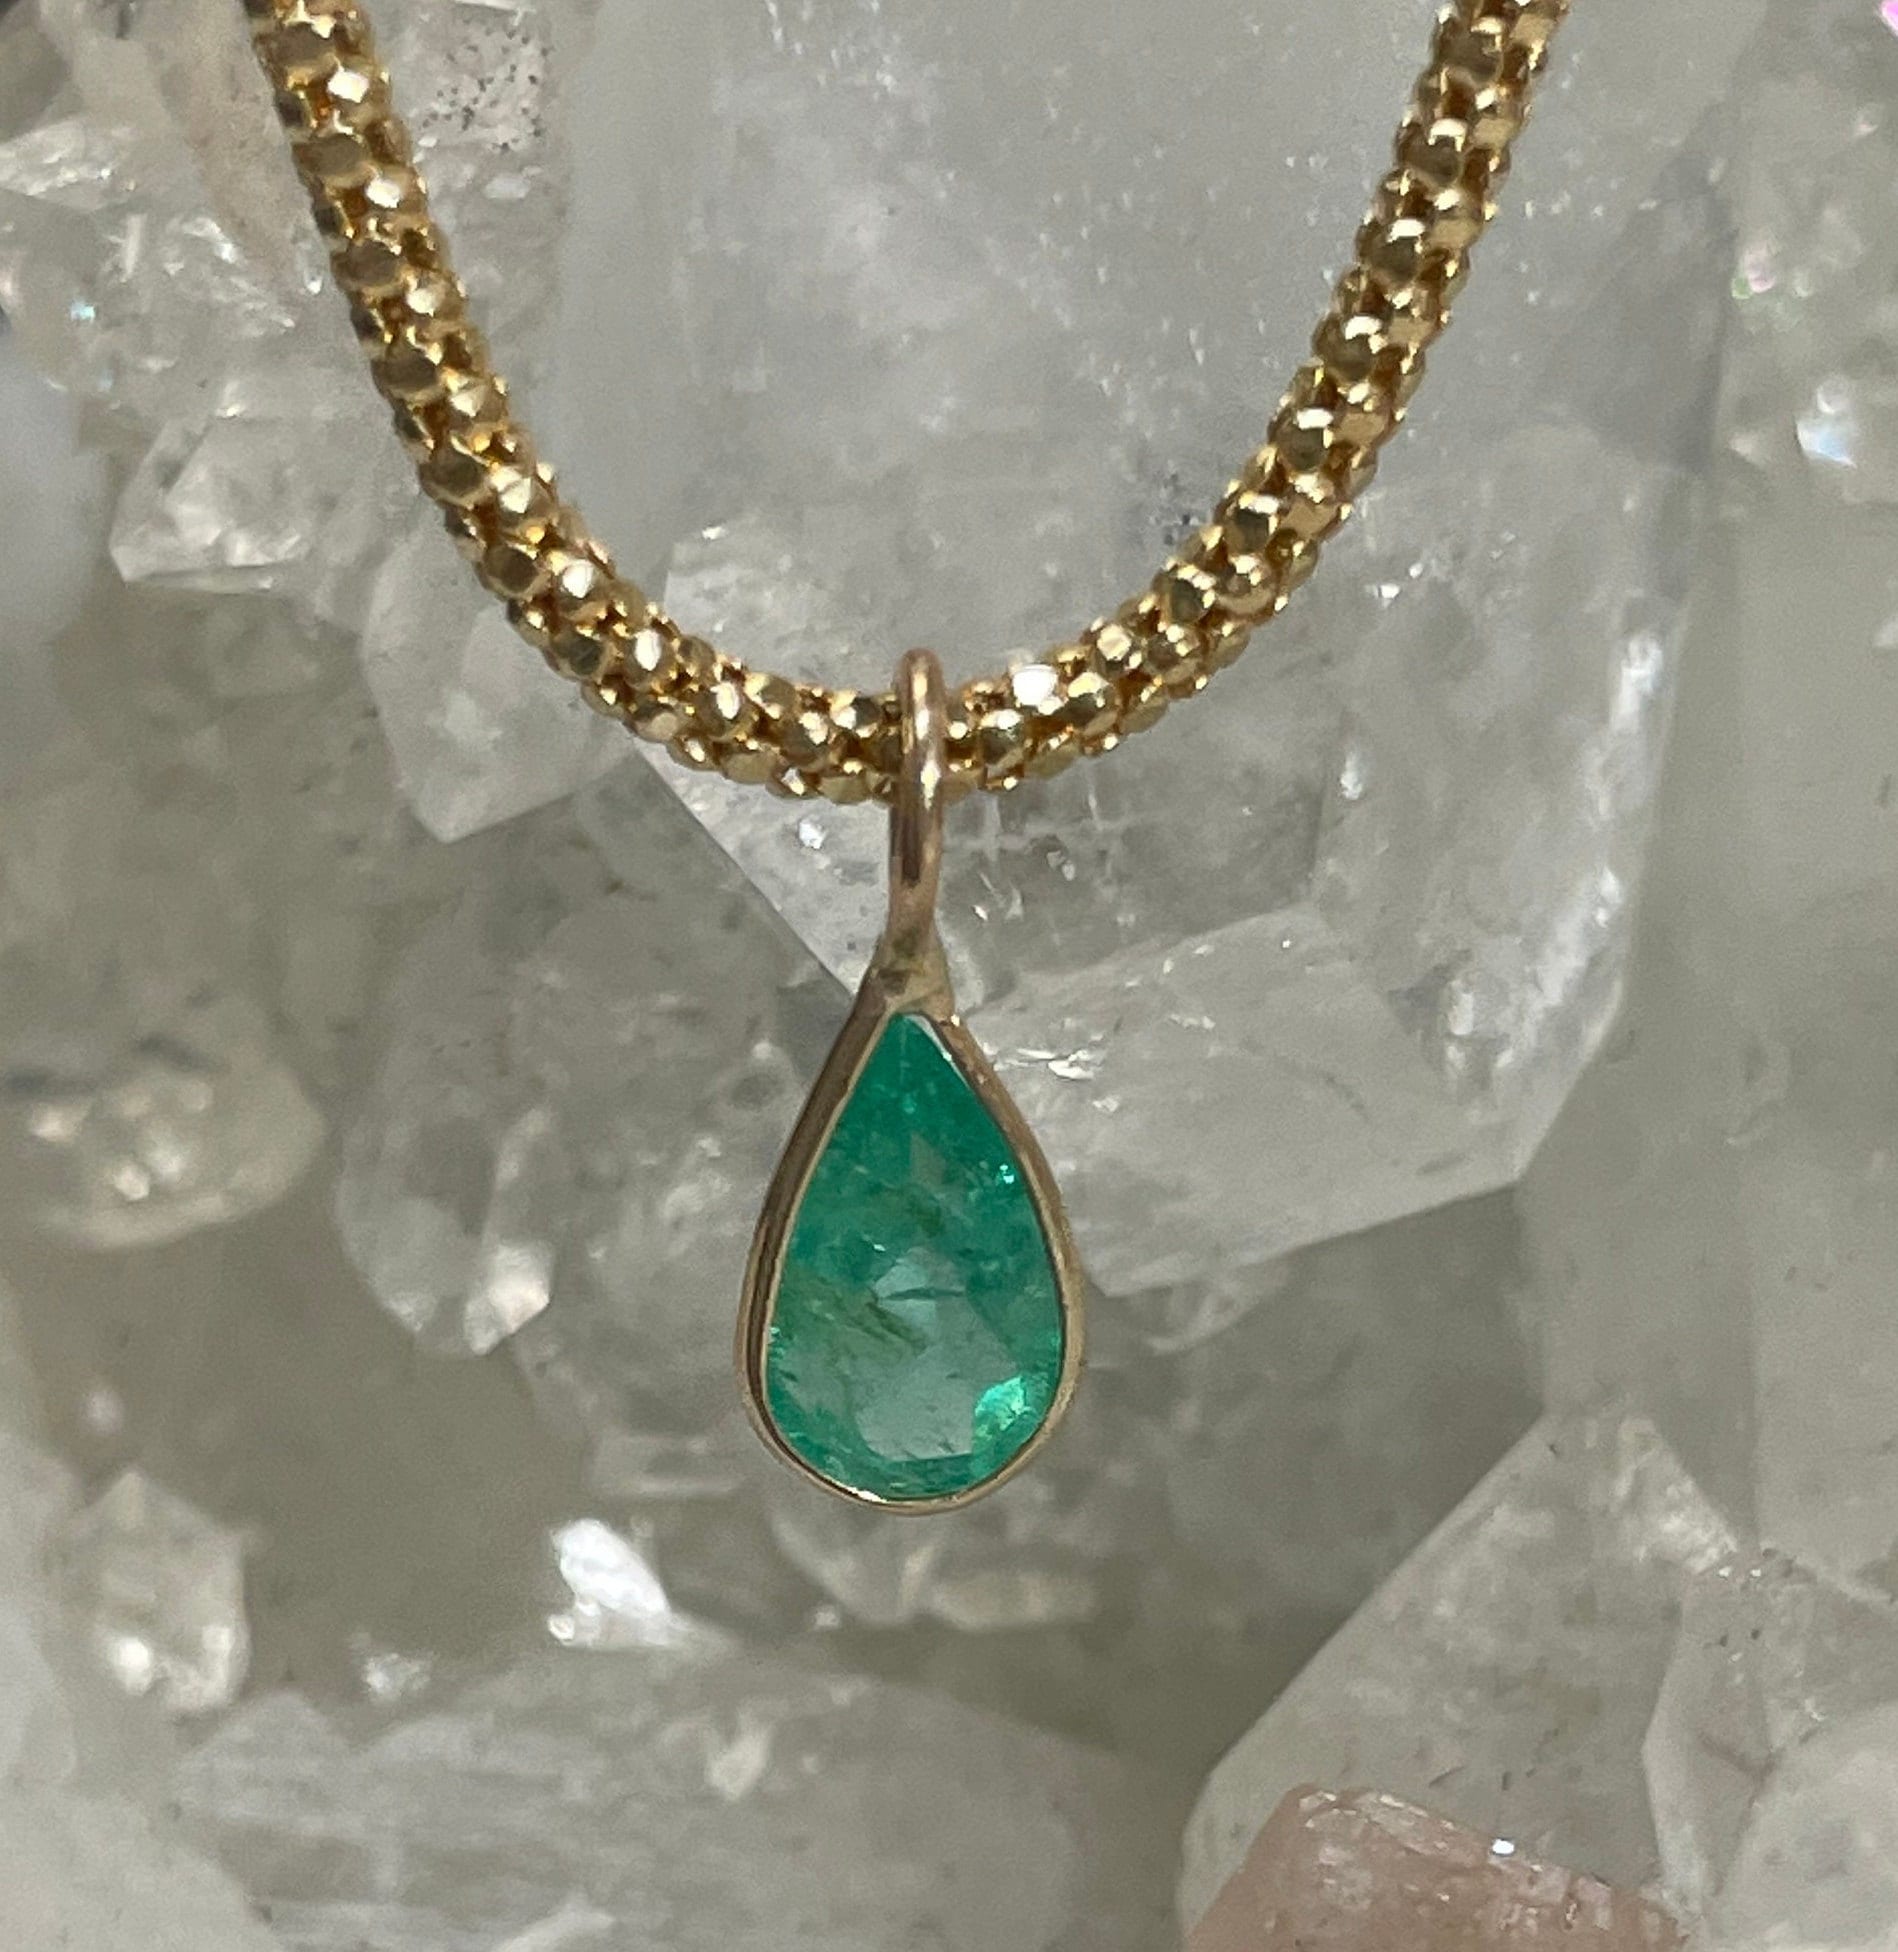 Shimmering! .65CT Natural Colombian Emerald 14K Yellow Gold Bezeled Charm Pendant OOAK 8x5mm